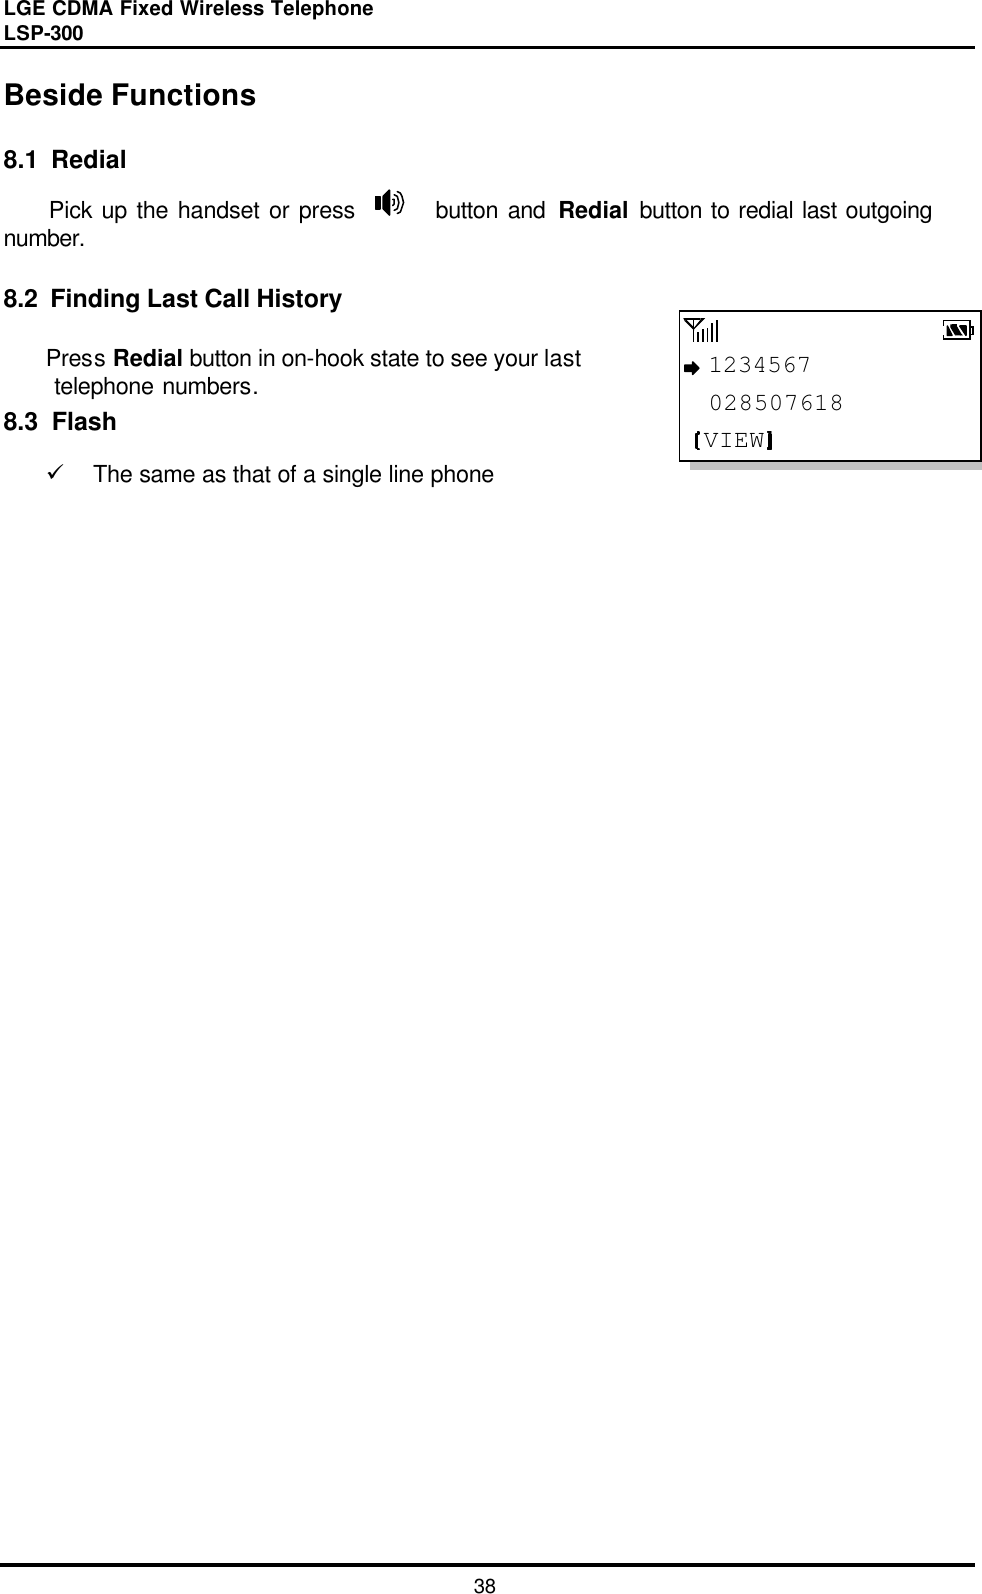 LGE CDMA Fixed Wireless Telephone                                       LSP-300     38  1234567 028507618VIEWBeside Functions  8.1  Redial Pick up the handset or press      button and Redial  button to redial last outgoing number.  8.2  Finding Last Call History  Press Redial button in on-hook state to see your last  telephone numbers. 8.3  Flash  ü  The same as that of a single line phone